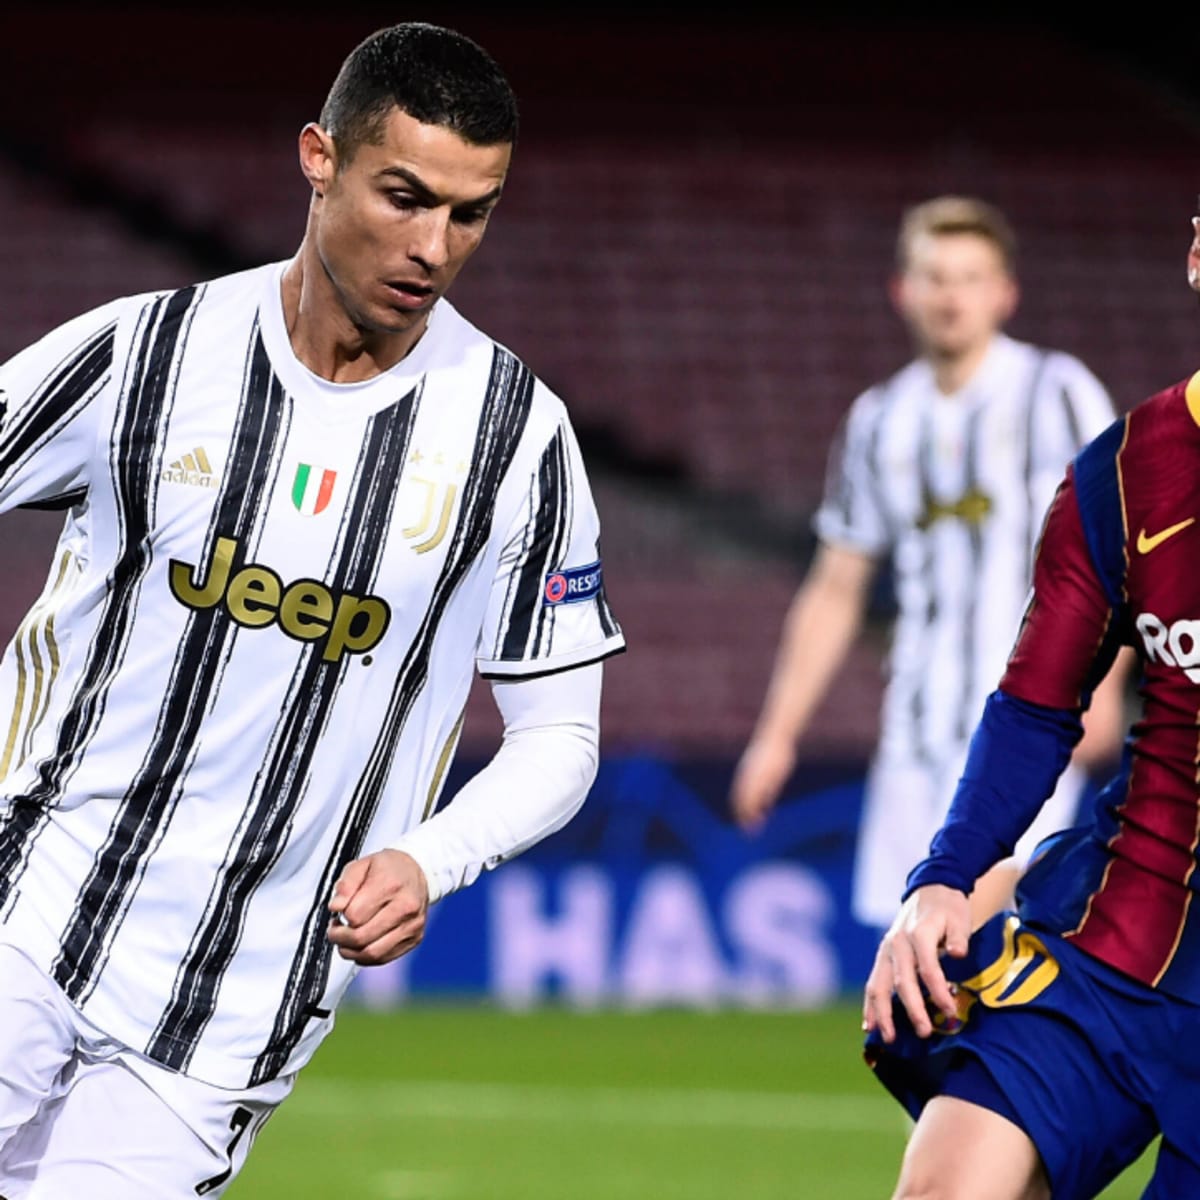 Ronaldo-Messi's Photo Playing Chess Breaks the Internet, Inspires